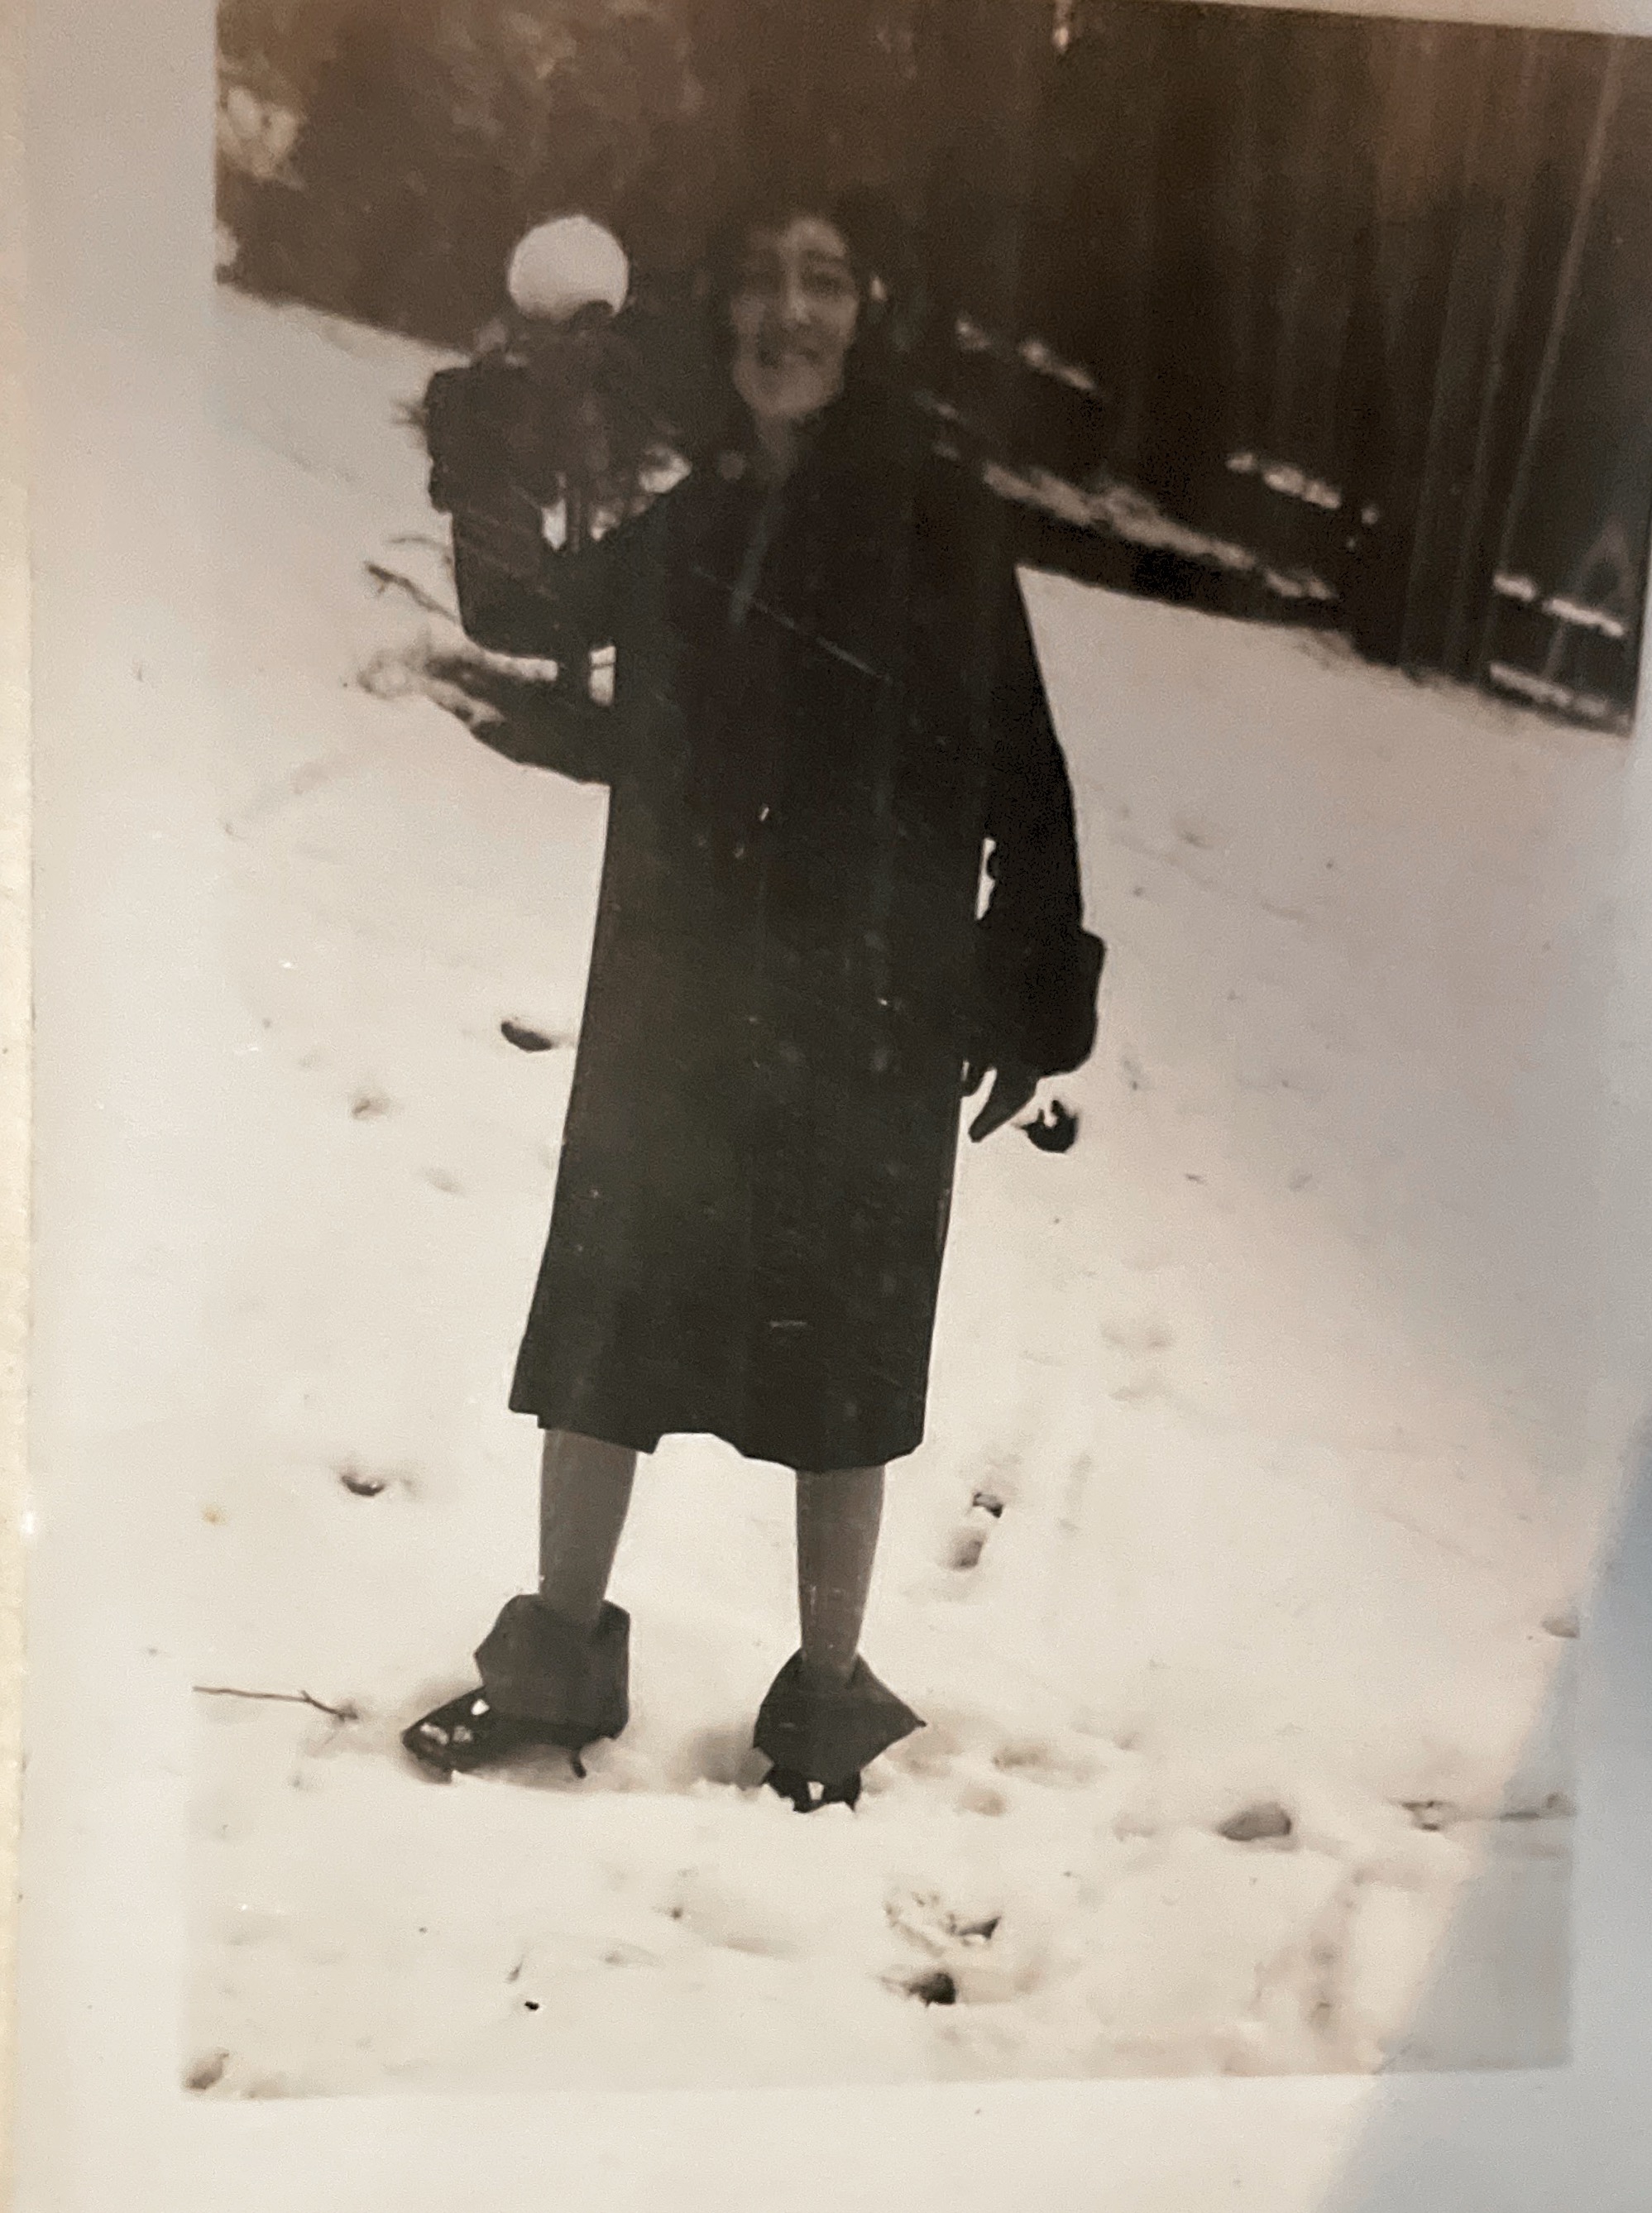 Taken on Christmas Day 1927  Quincy California